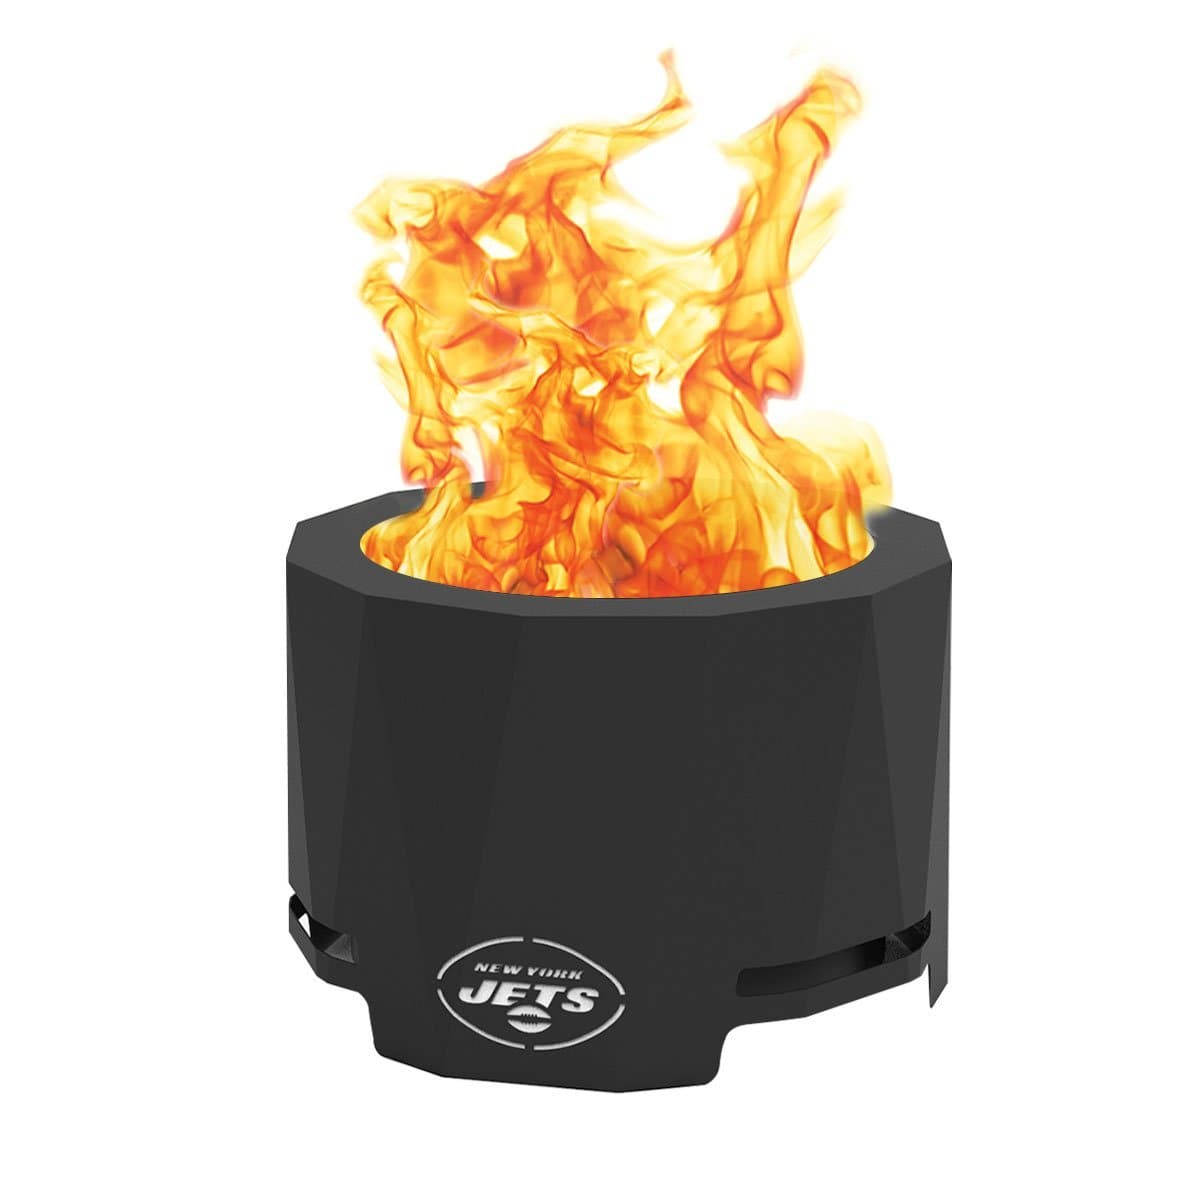 Blue Sky Outdoor Fire Pits - NFL Licensed New York Jets - Senior.com Fire Pits